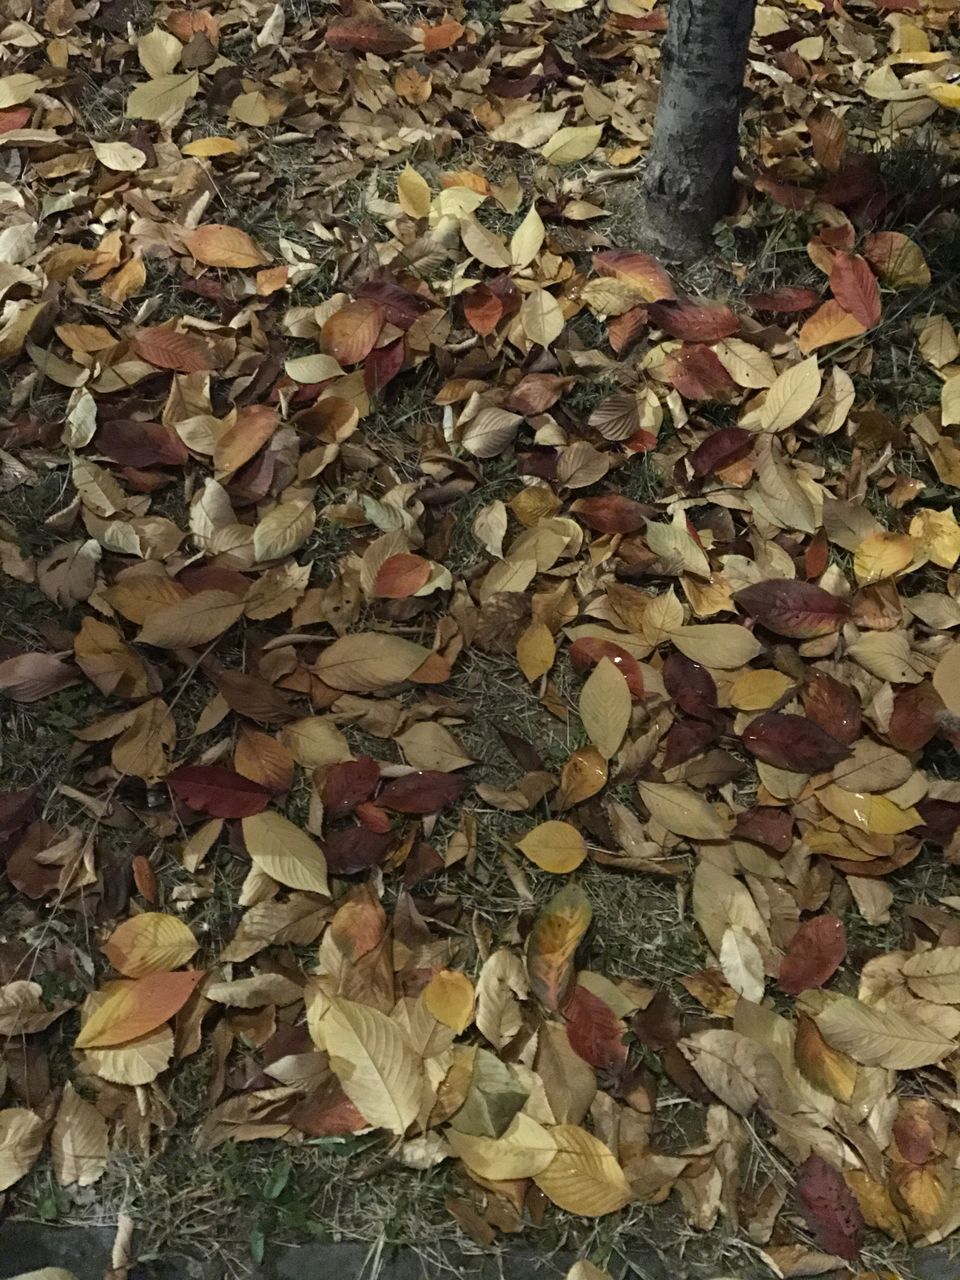 CLOSE-UP OF AUTUMN LEAVES ON GROUND